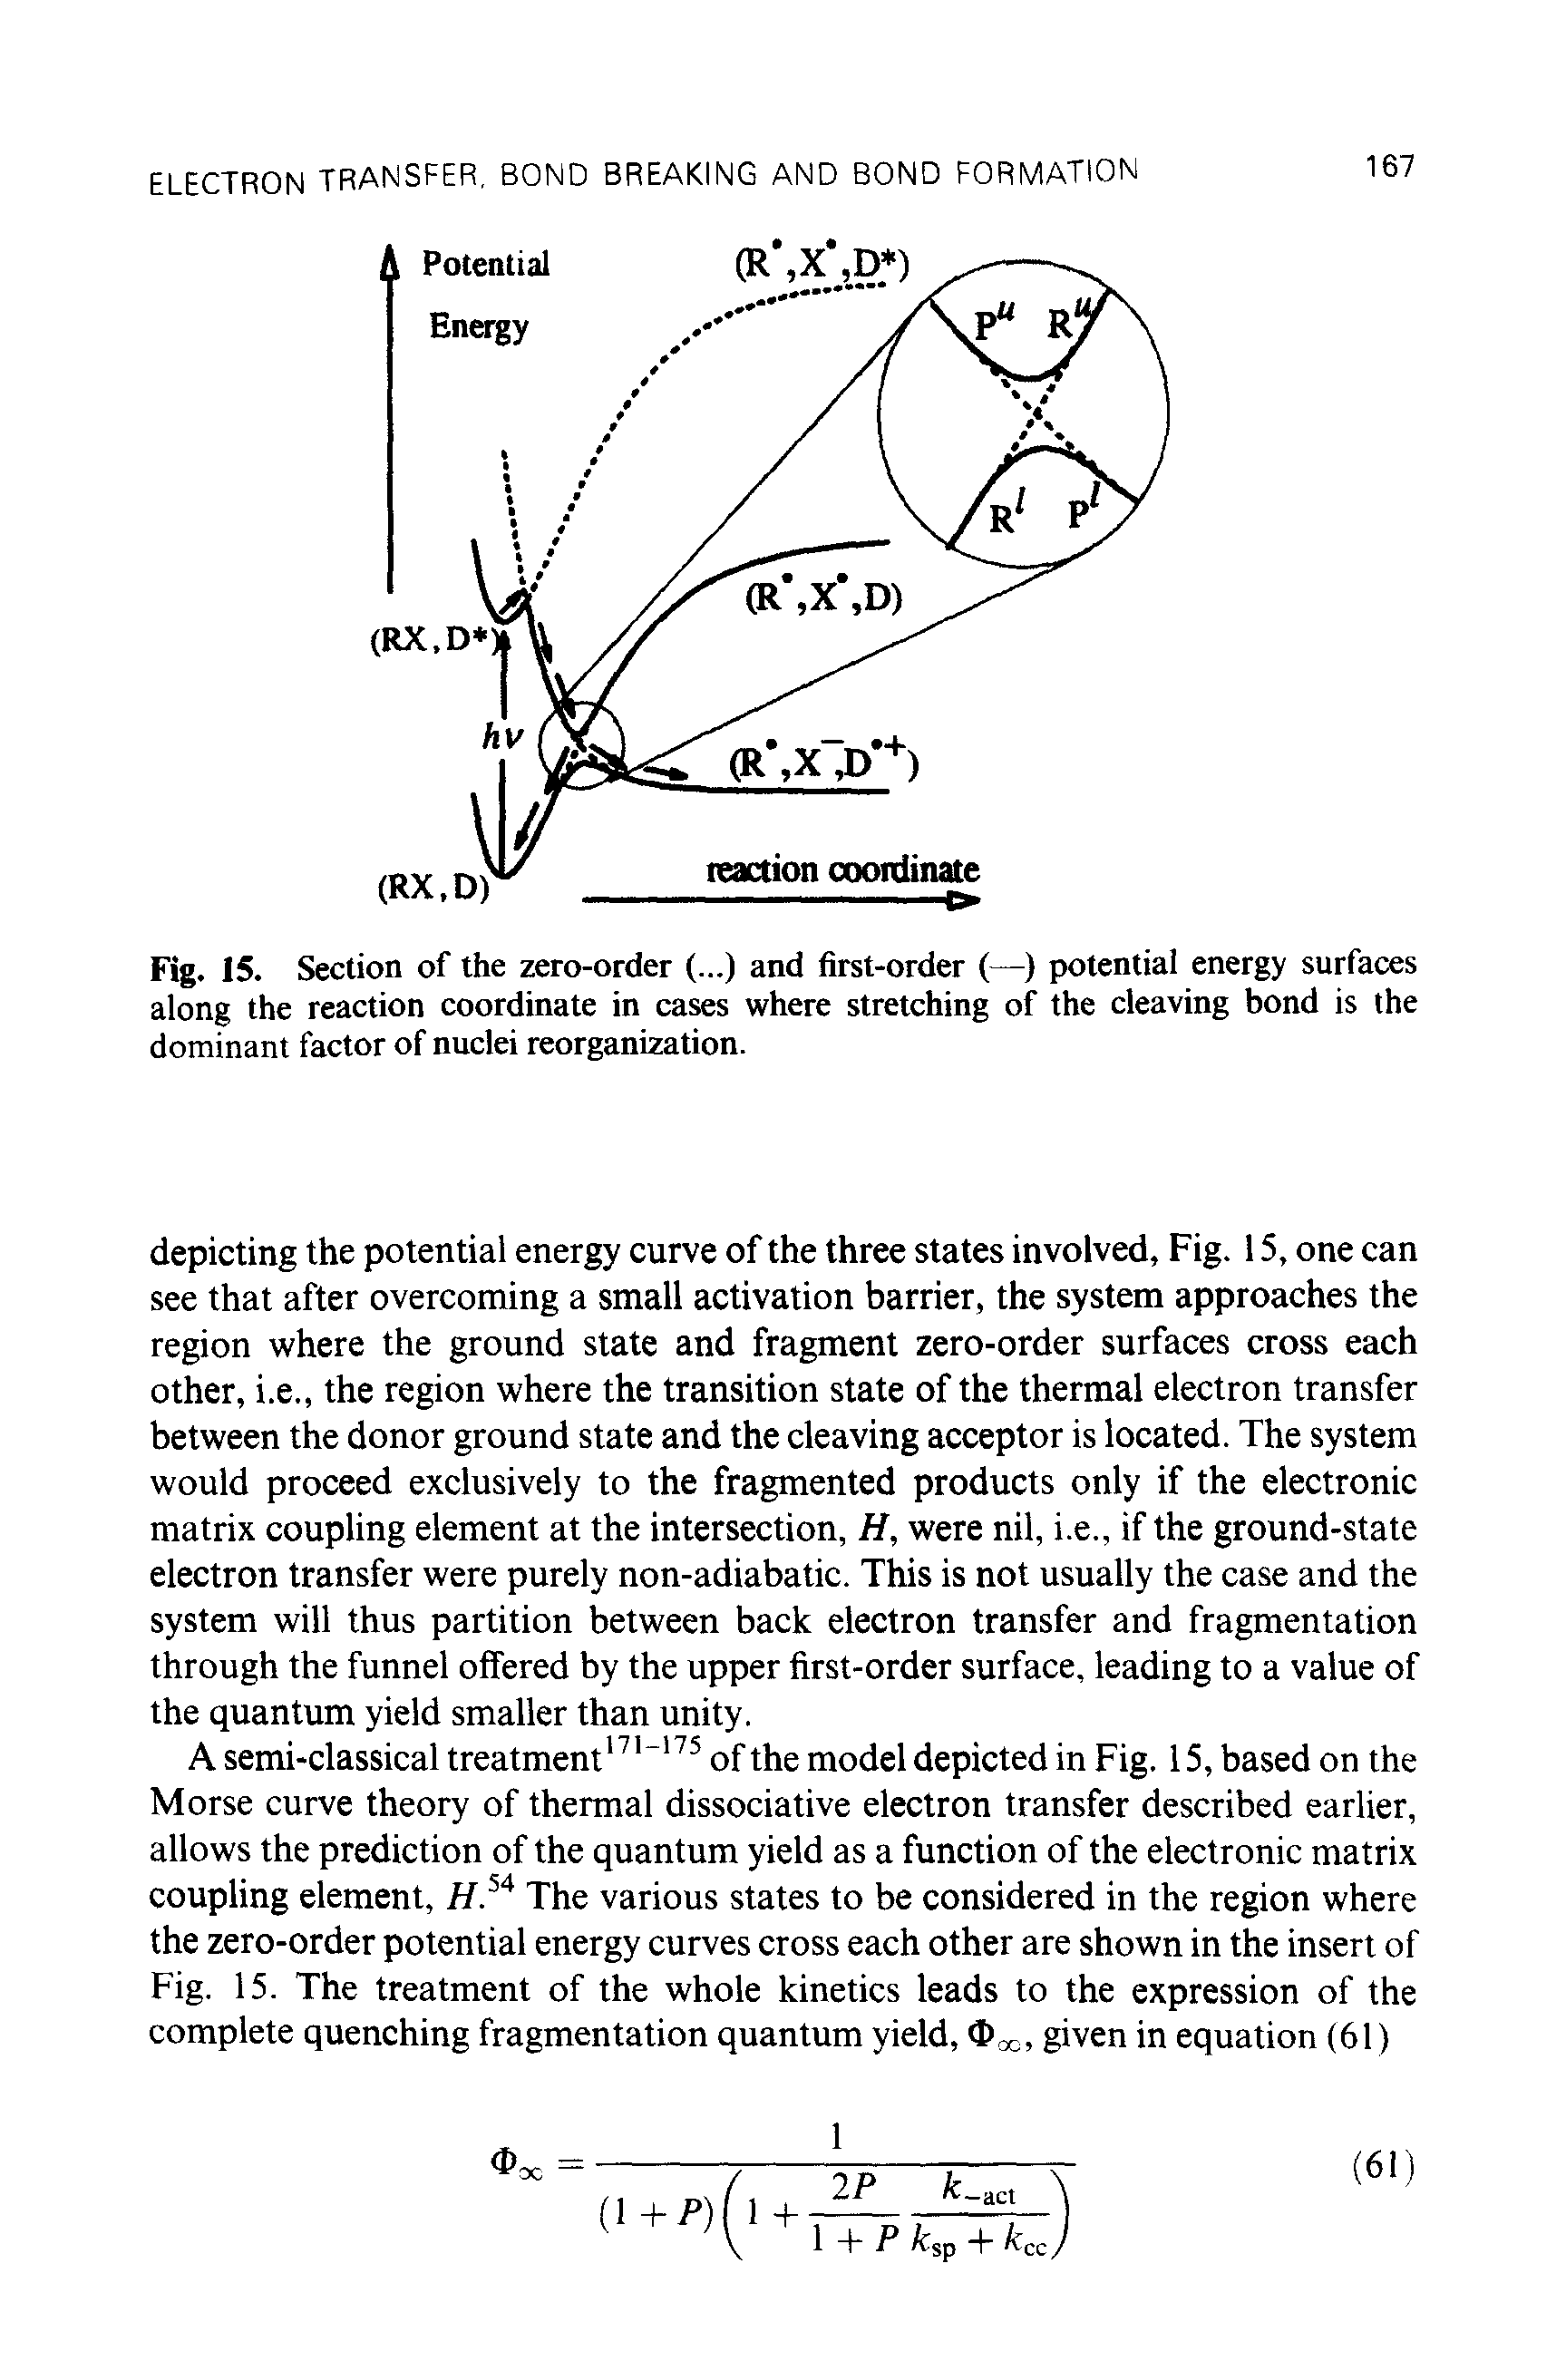 Fig. 15. Section of the zero-order (...) and first-order (—) potential energy surfaces along the reaction coordinate in cases where stretching of the cleaving bond is the dominant factor of nuclei reorganization.